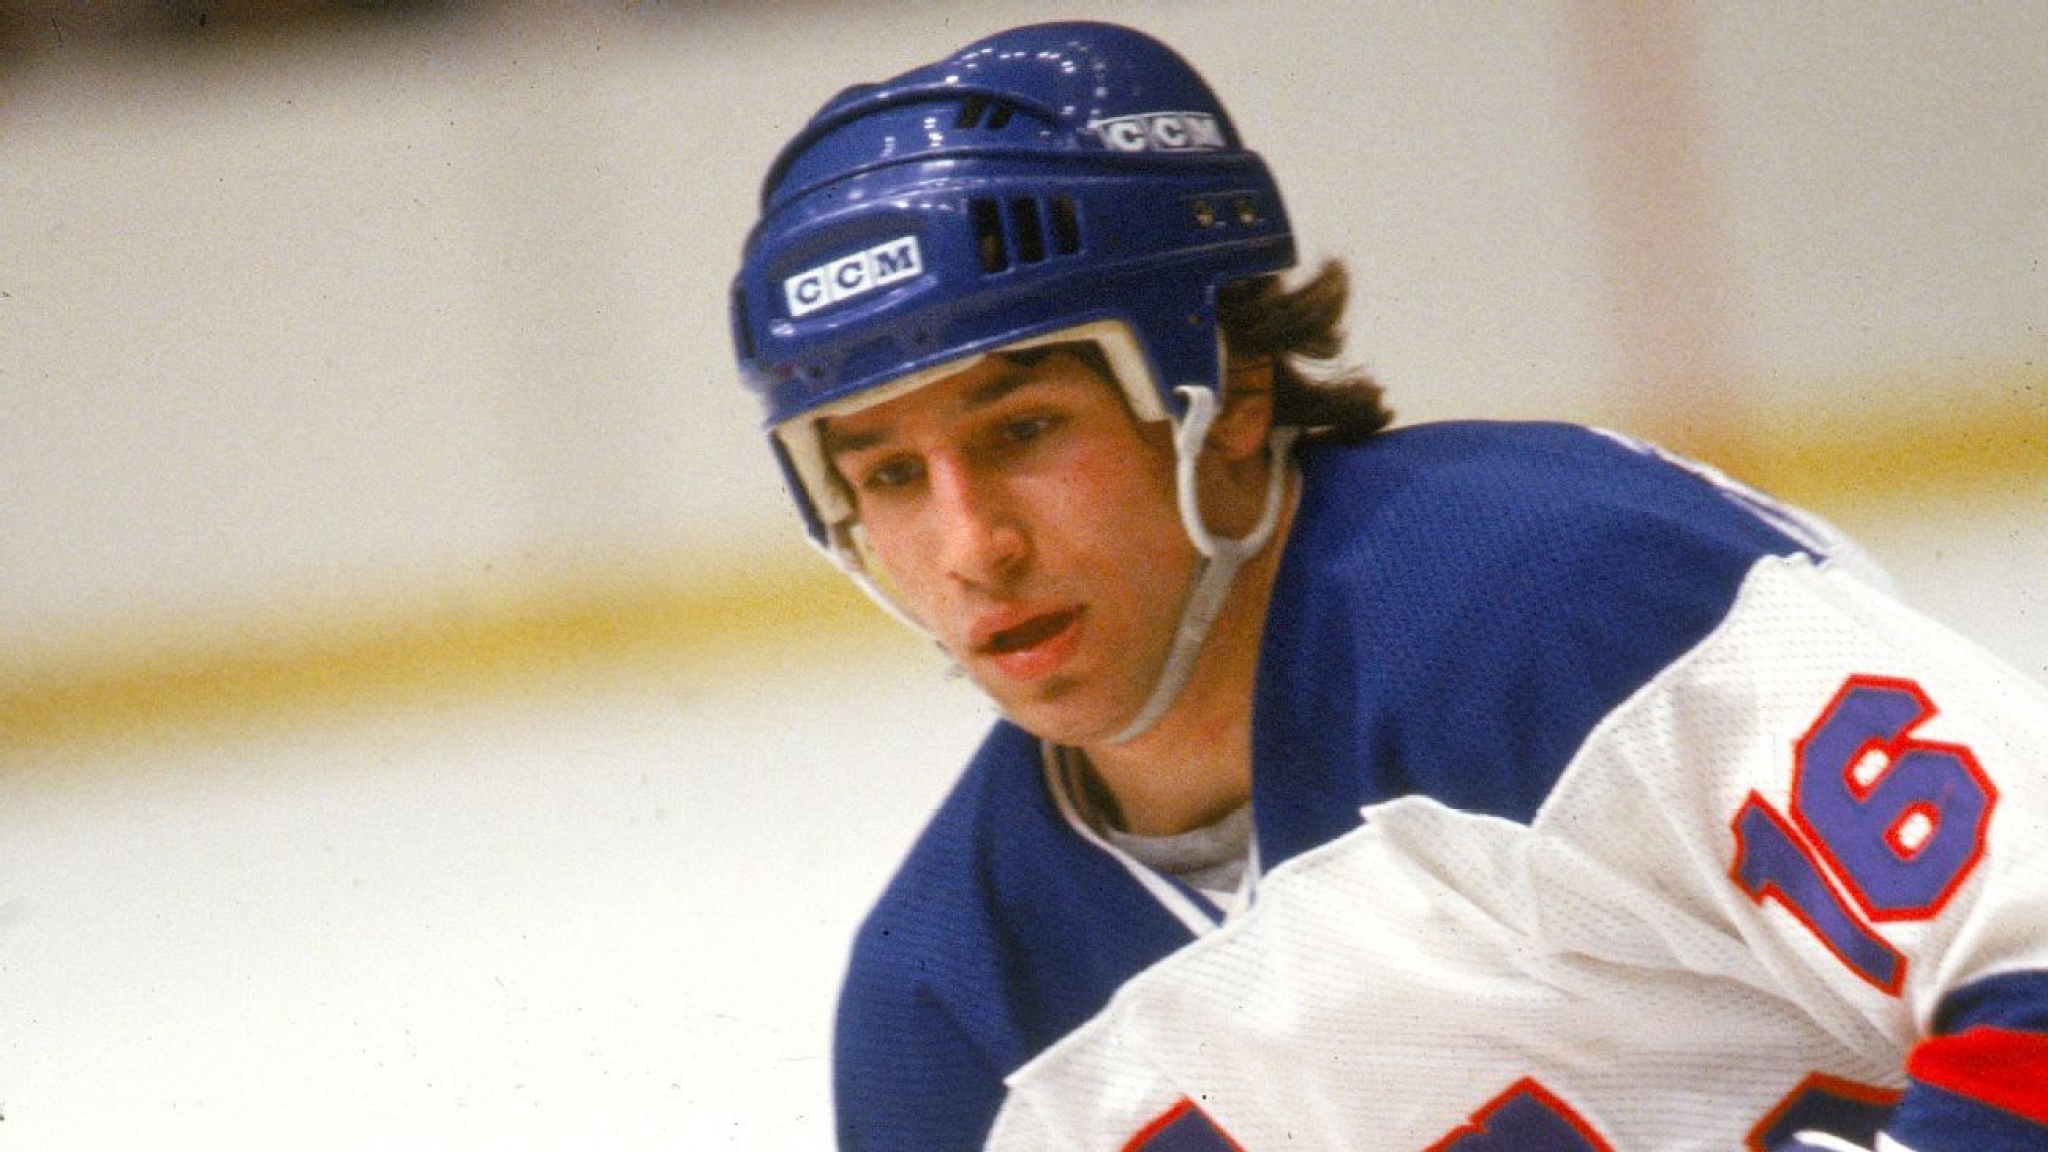 Death of ex-hockey star Pavelich ruled suicide